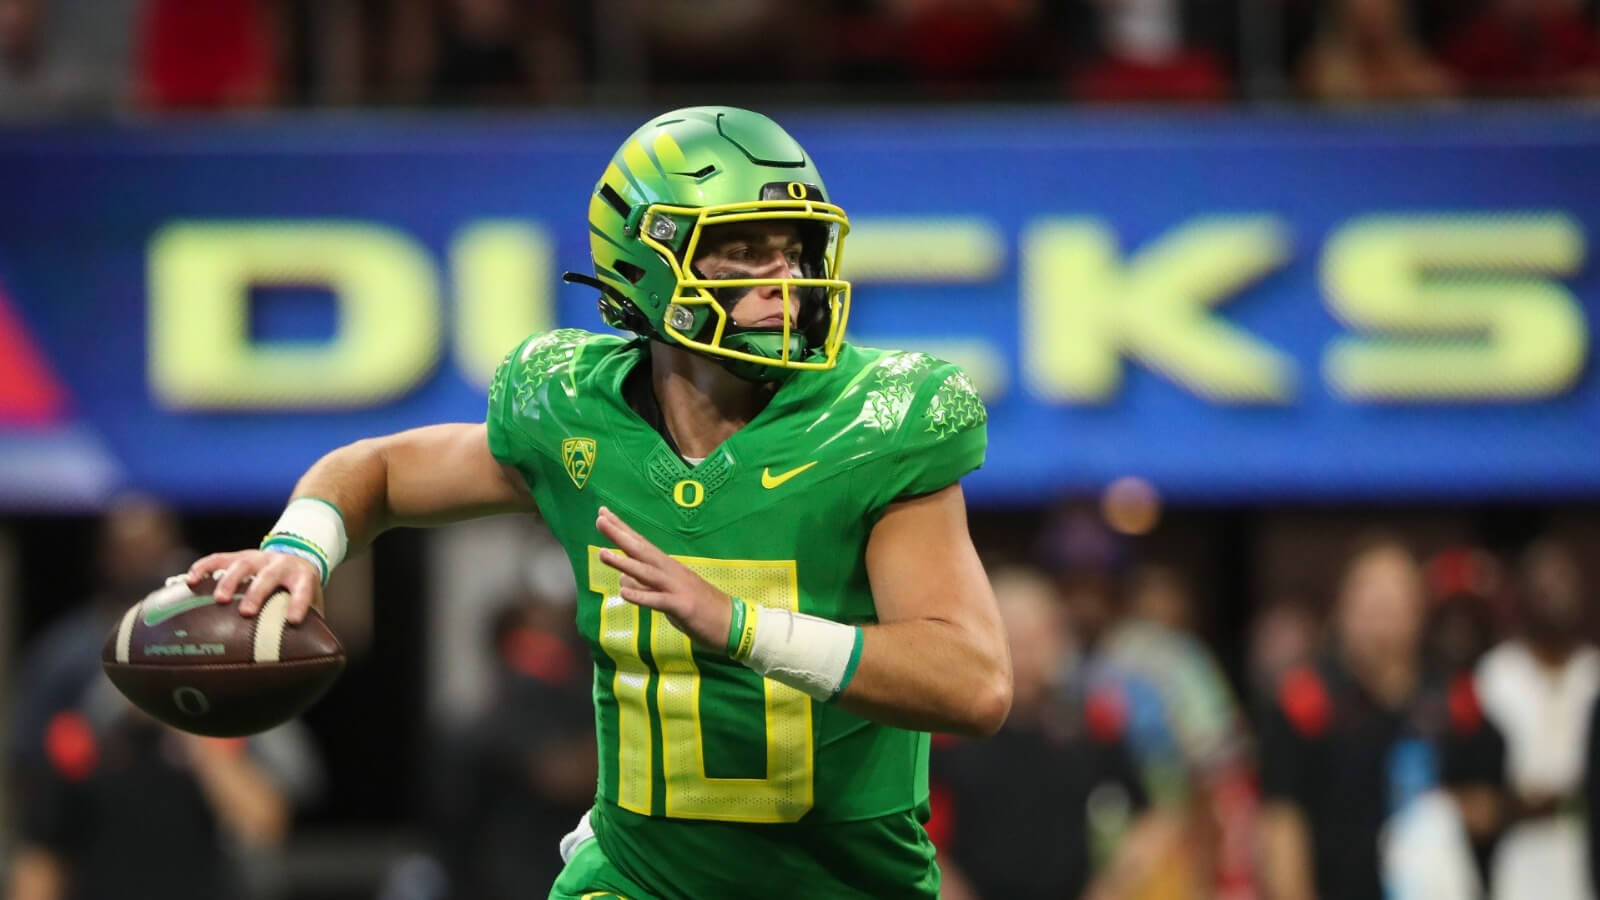 Bulldogs vs Oregon Ducks Preview, News, Videos and Official